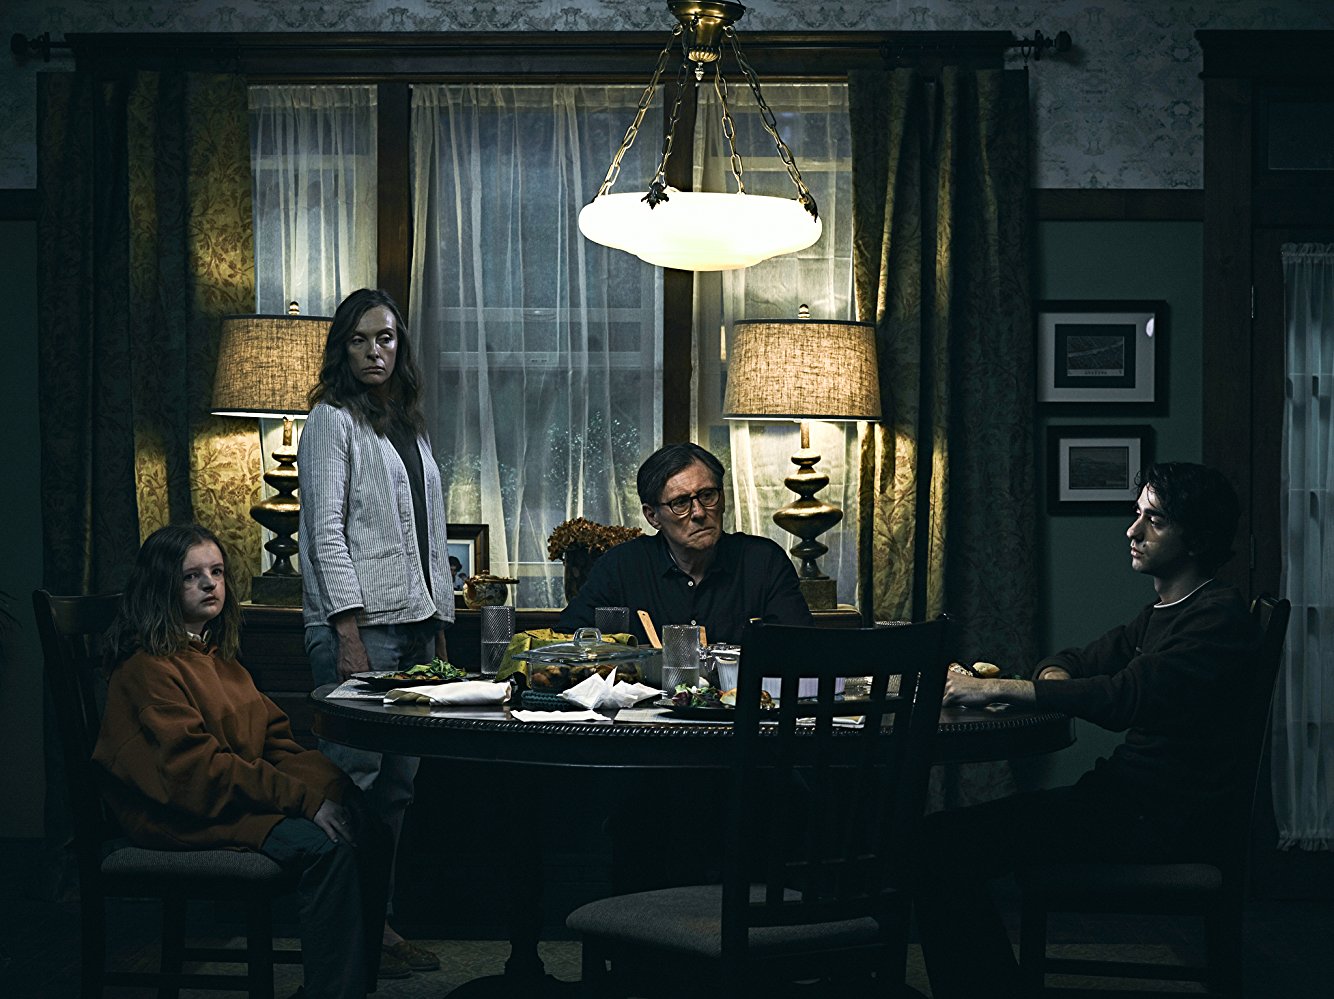 ‘Hereditary’ is frightening trip through an affecting nightmare